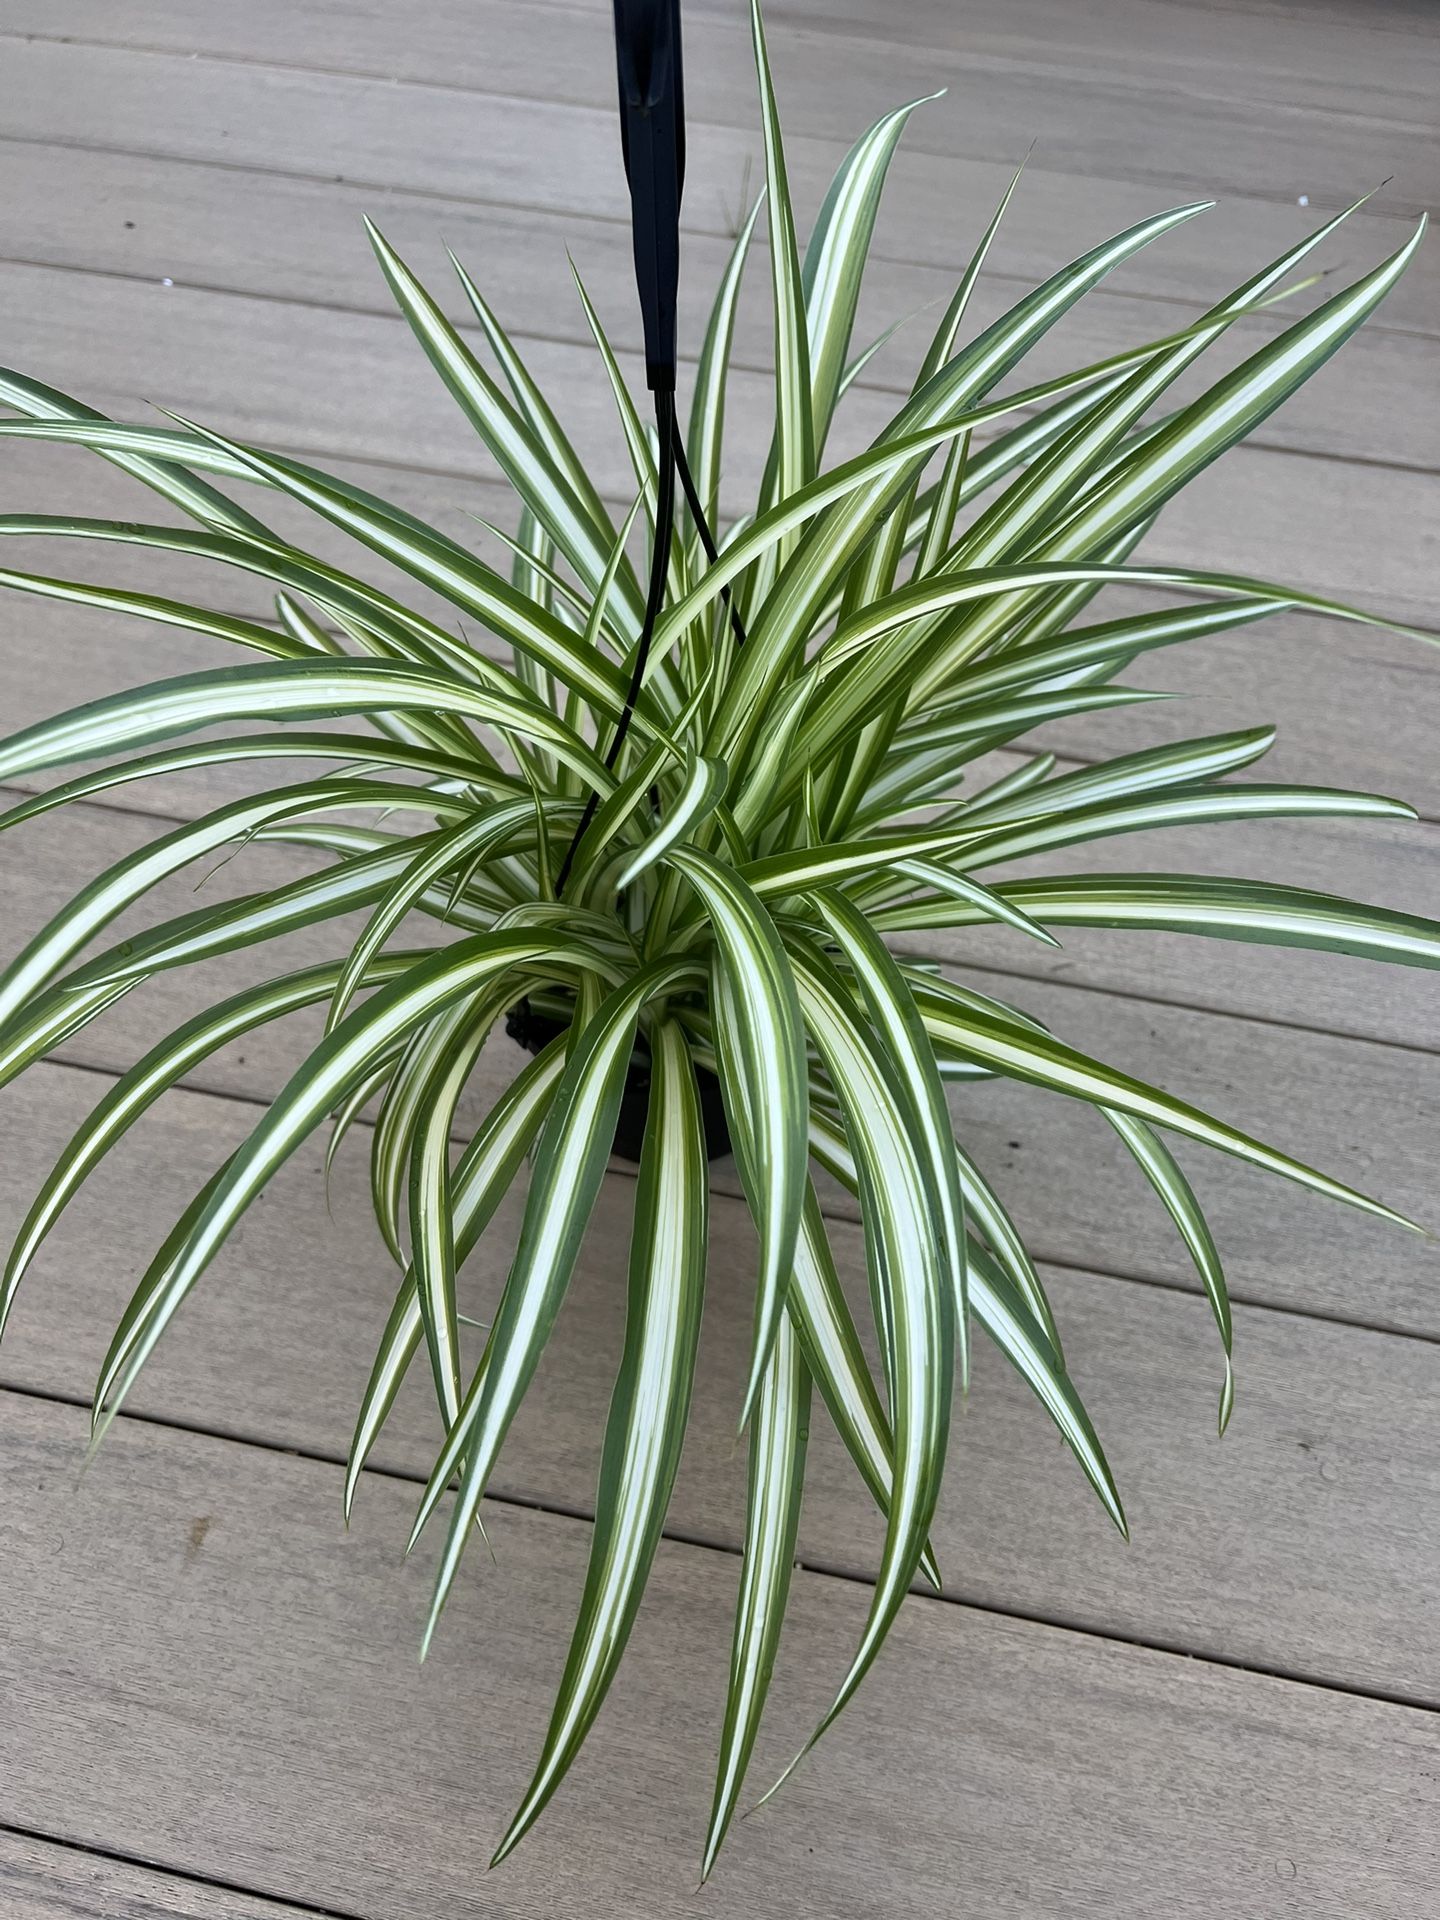 Spider plant, live plant comes in a 6” nursery pot